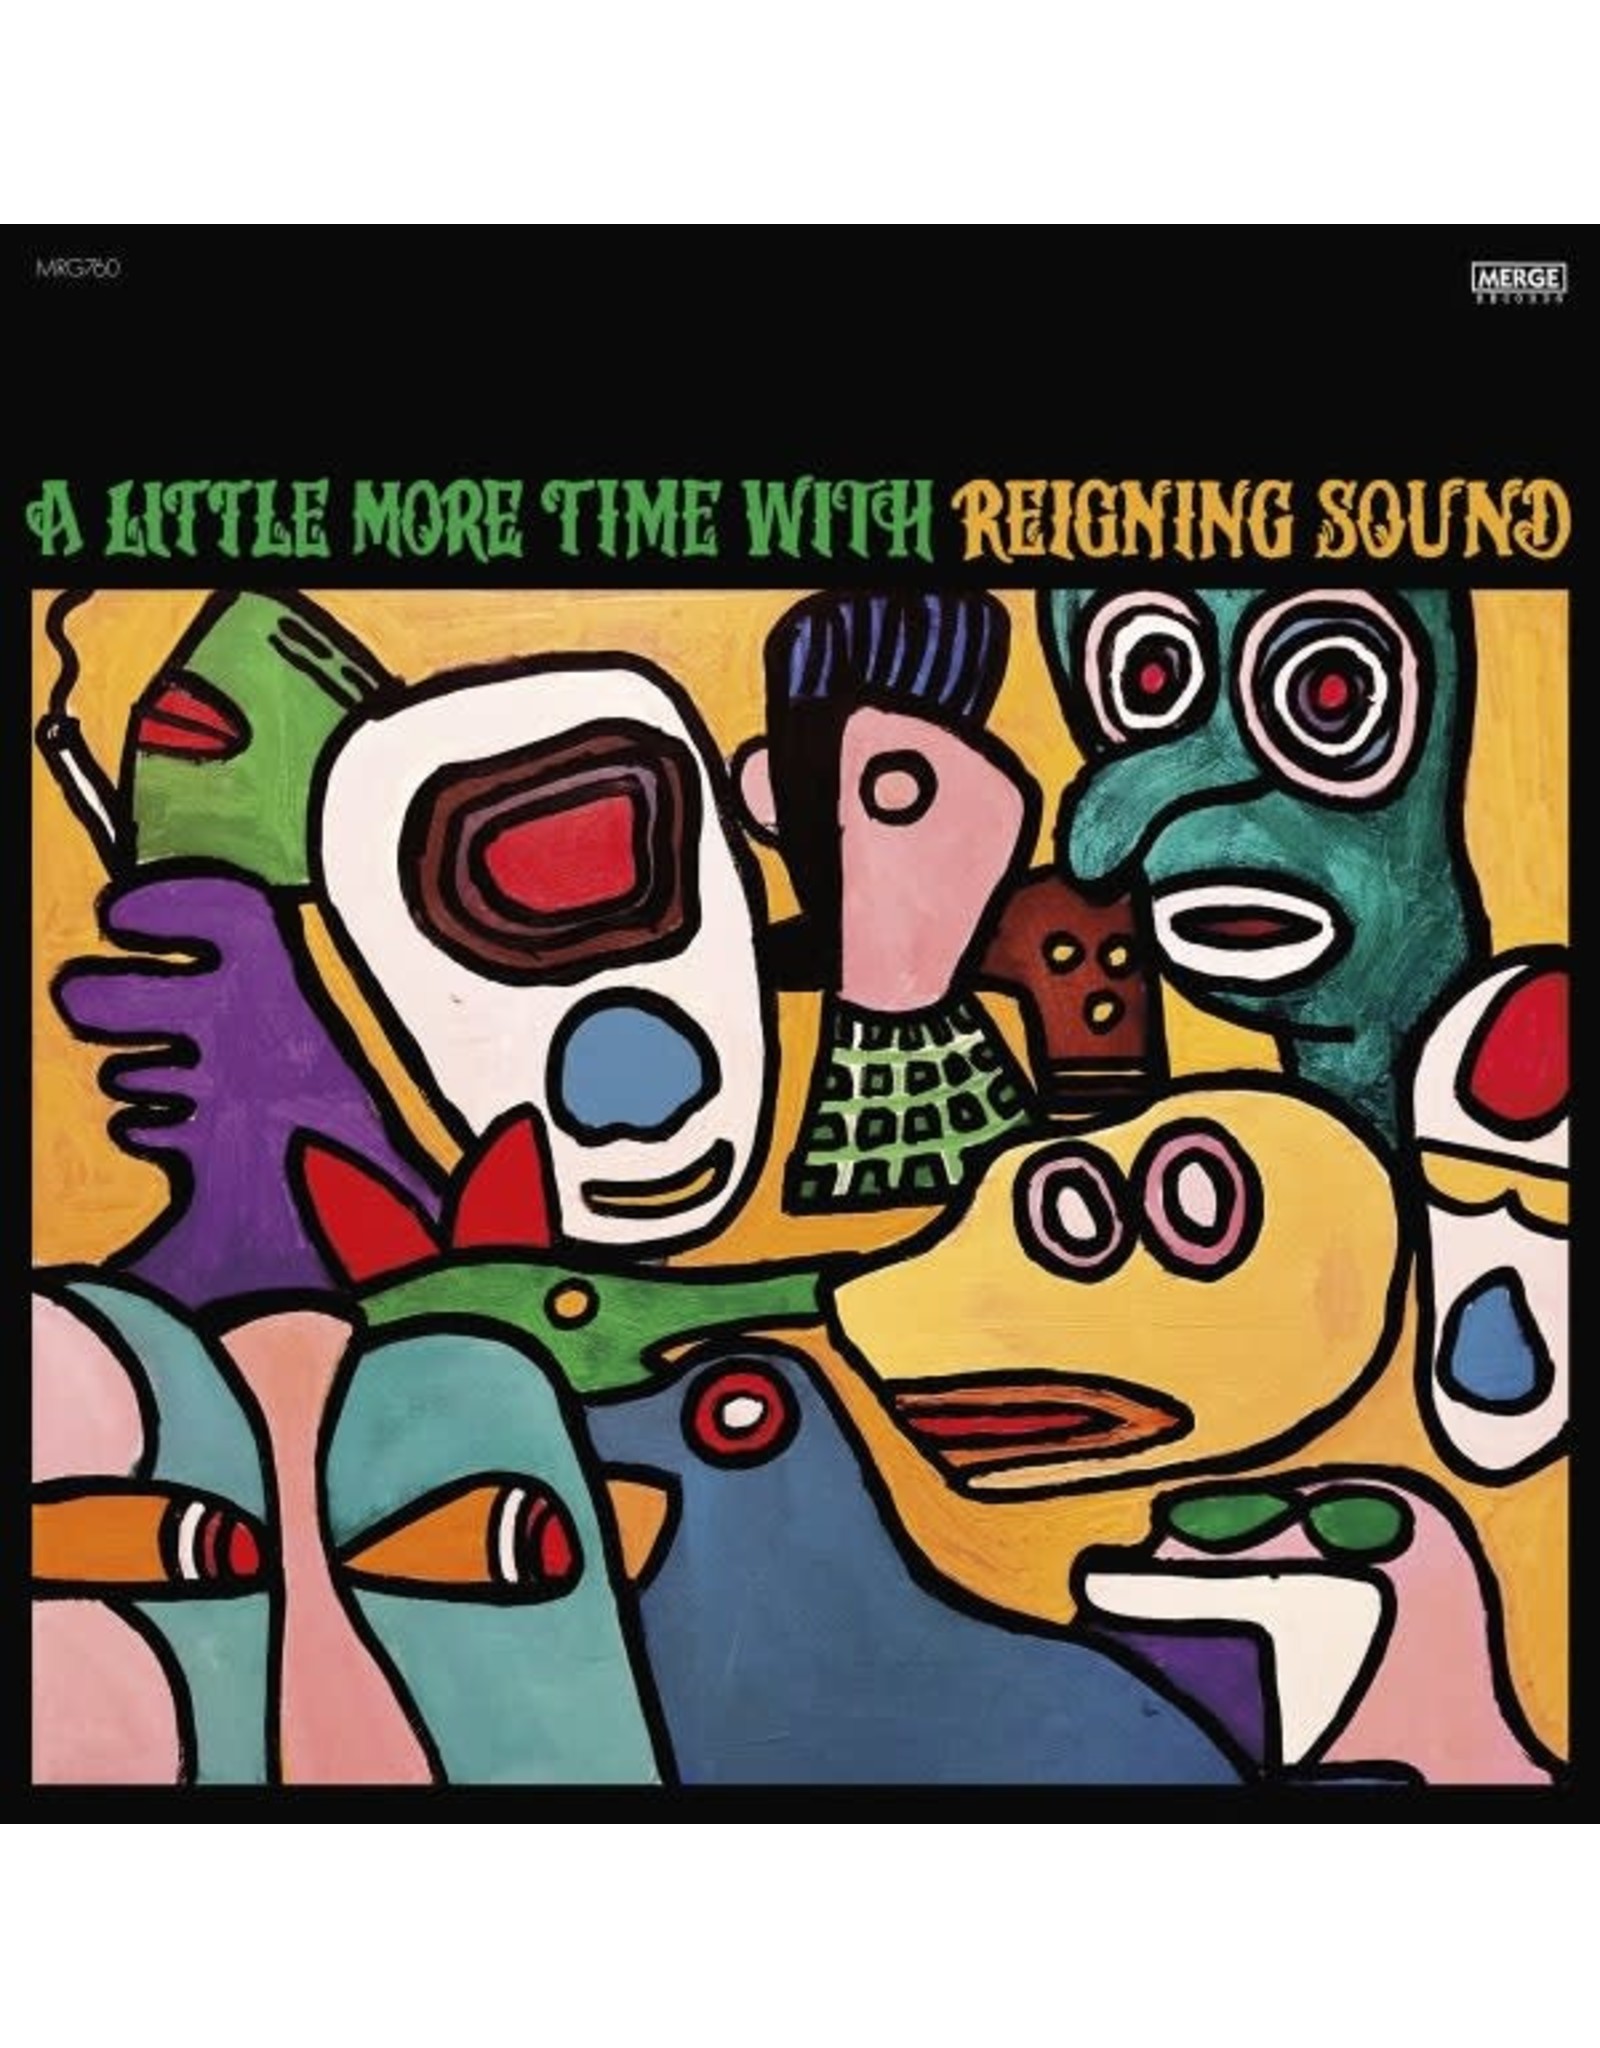 Reigning Sound - A Little More Time With Reigning Sound LP (Ltd. Yellow & Green Swirl Vinyl)